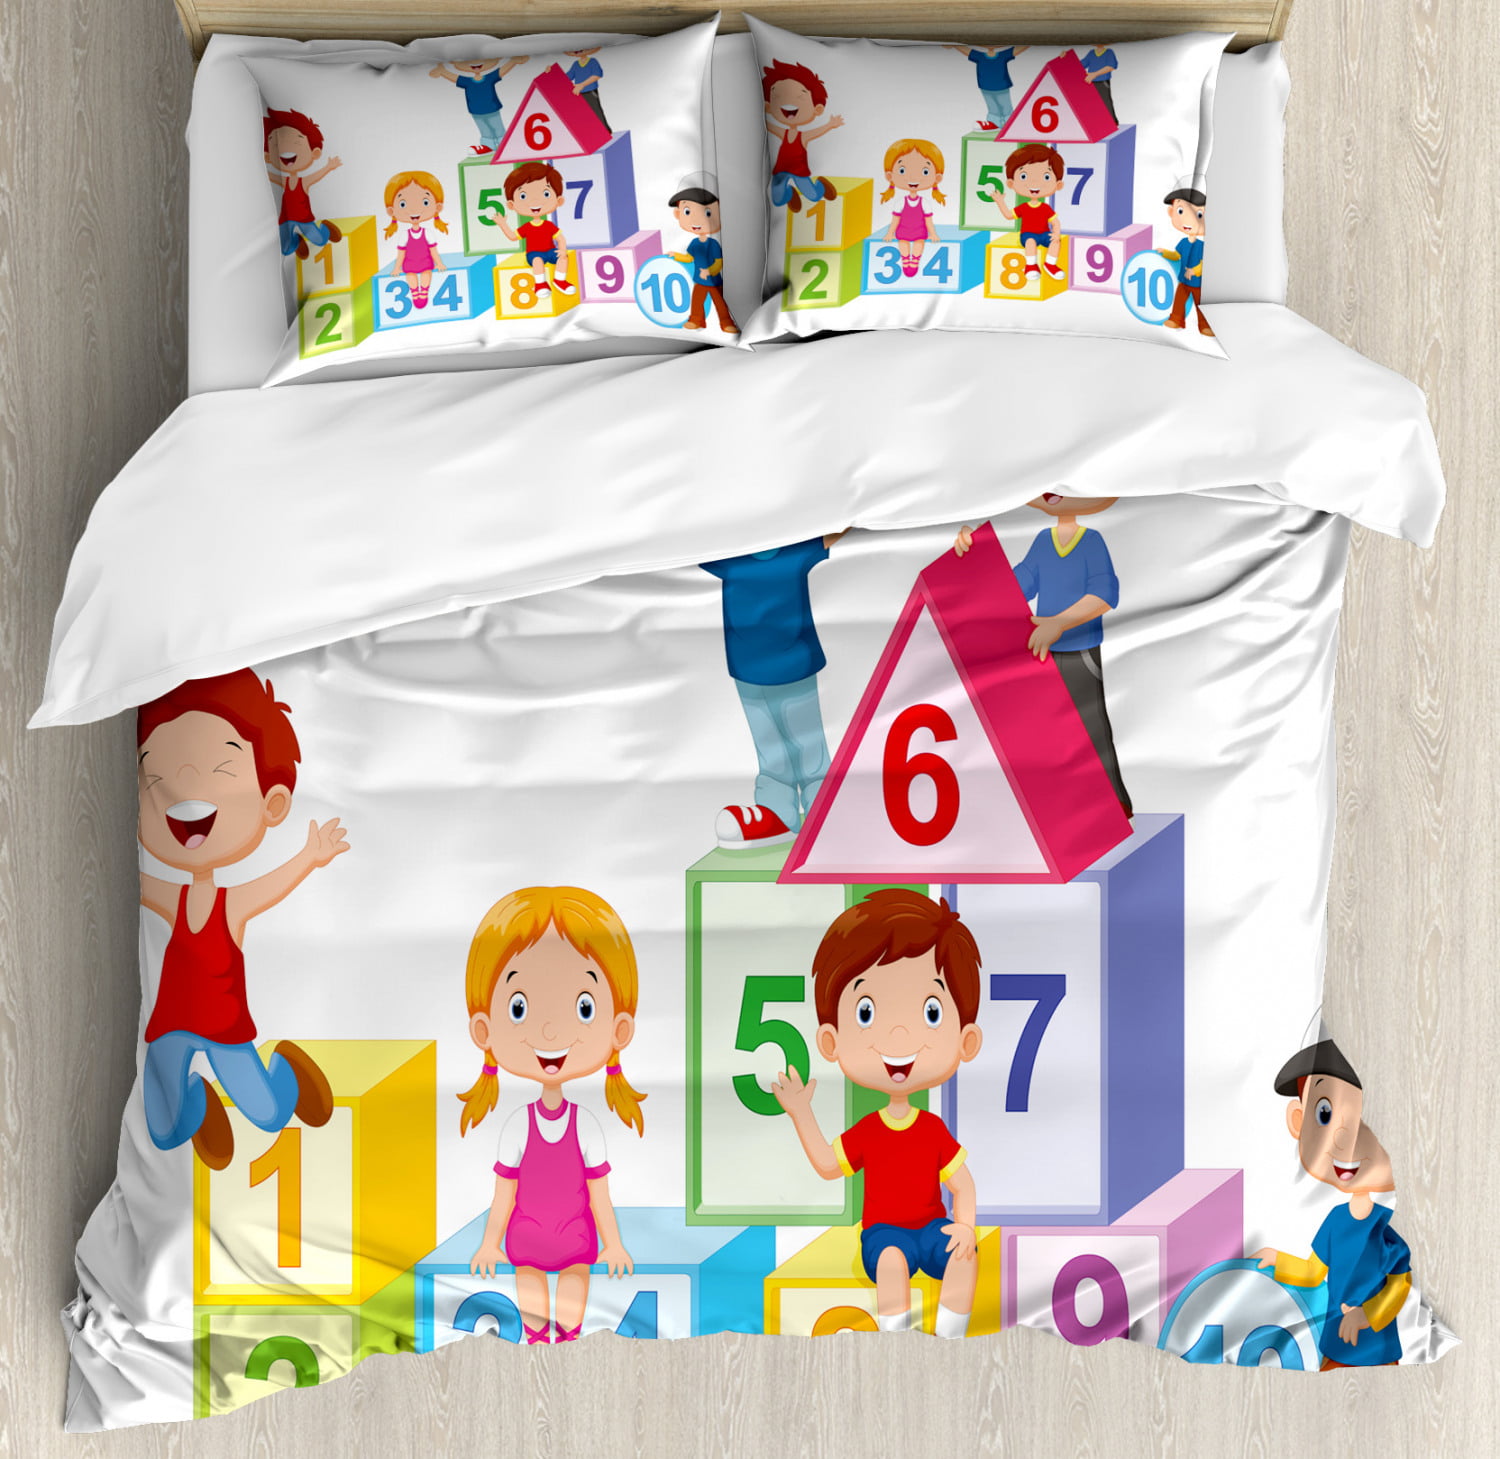 Educational Queen Size Duvet Cover Set Happy Kids Boys And Girls With Number Blocks Triangle Rectangle And Square Decorative 3 Piece Bedding Set With 2 Pillow Shams Multicolor By Ambesonne Walmart Com